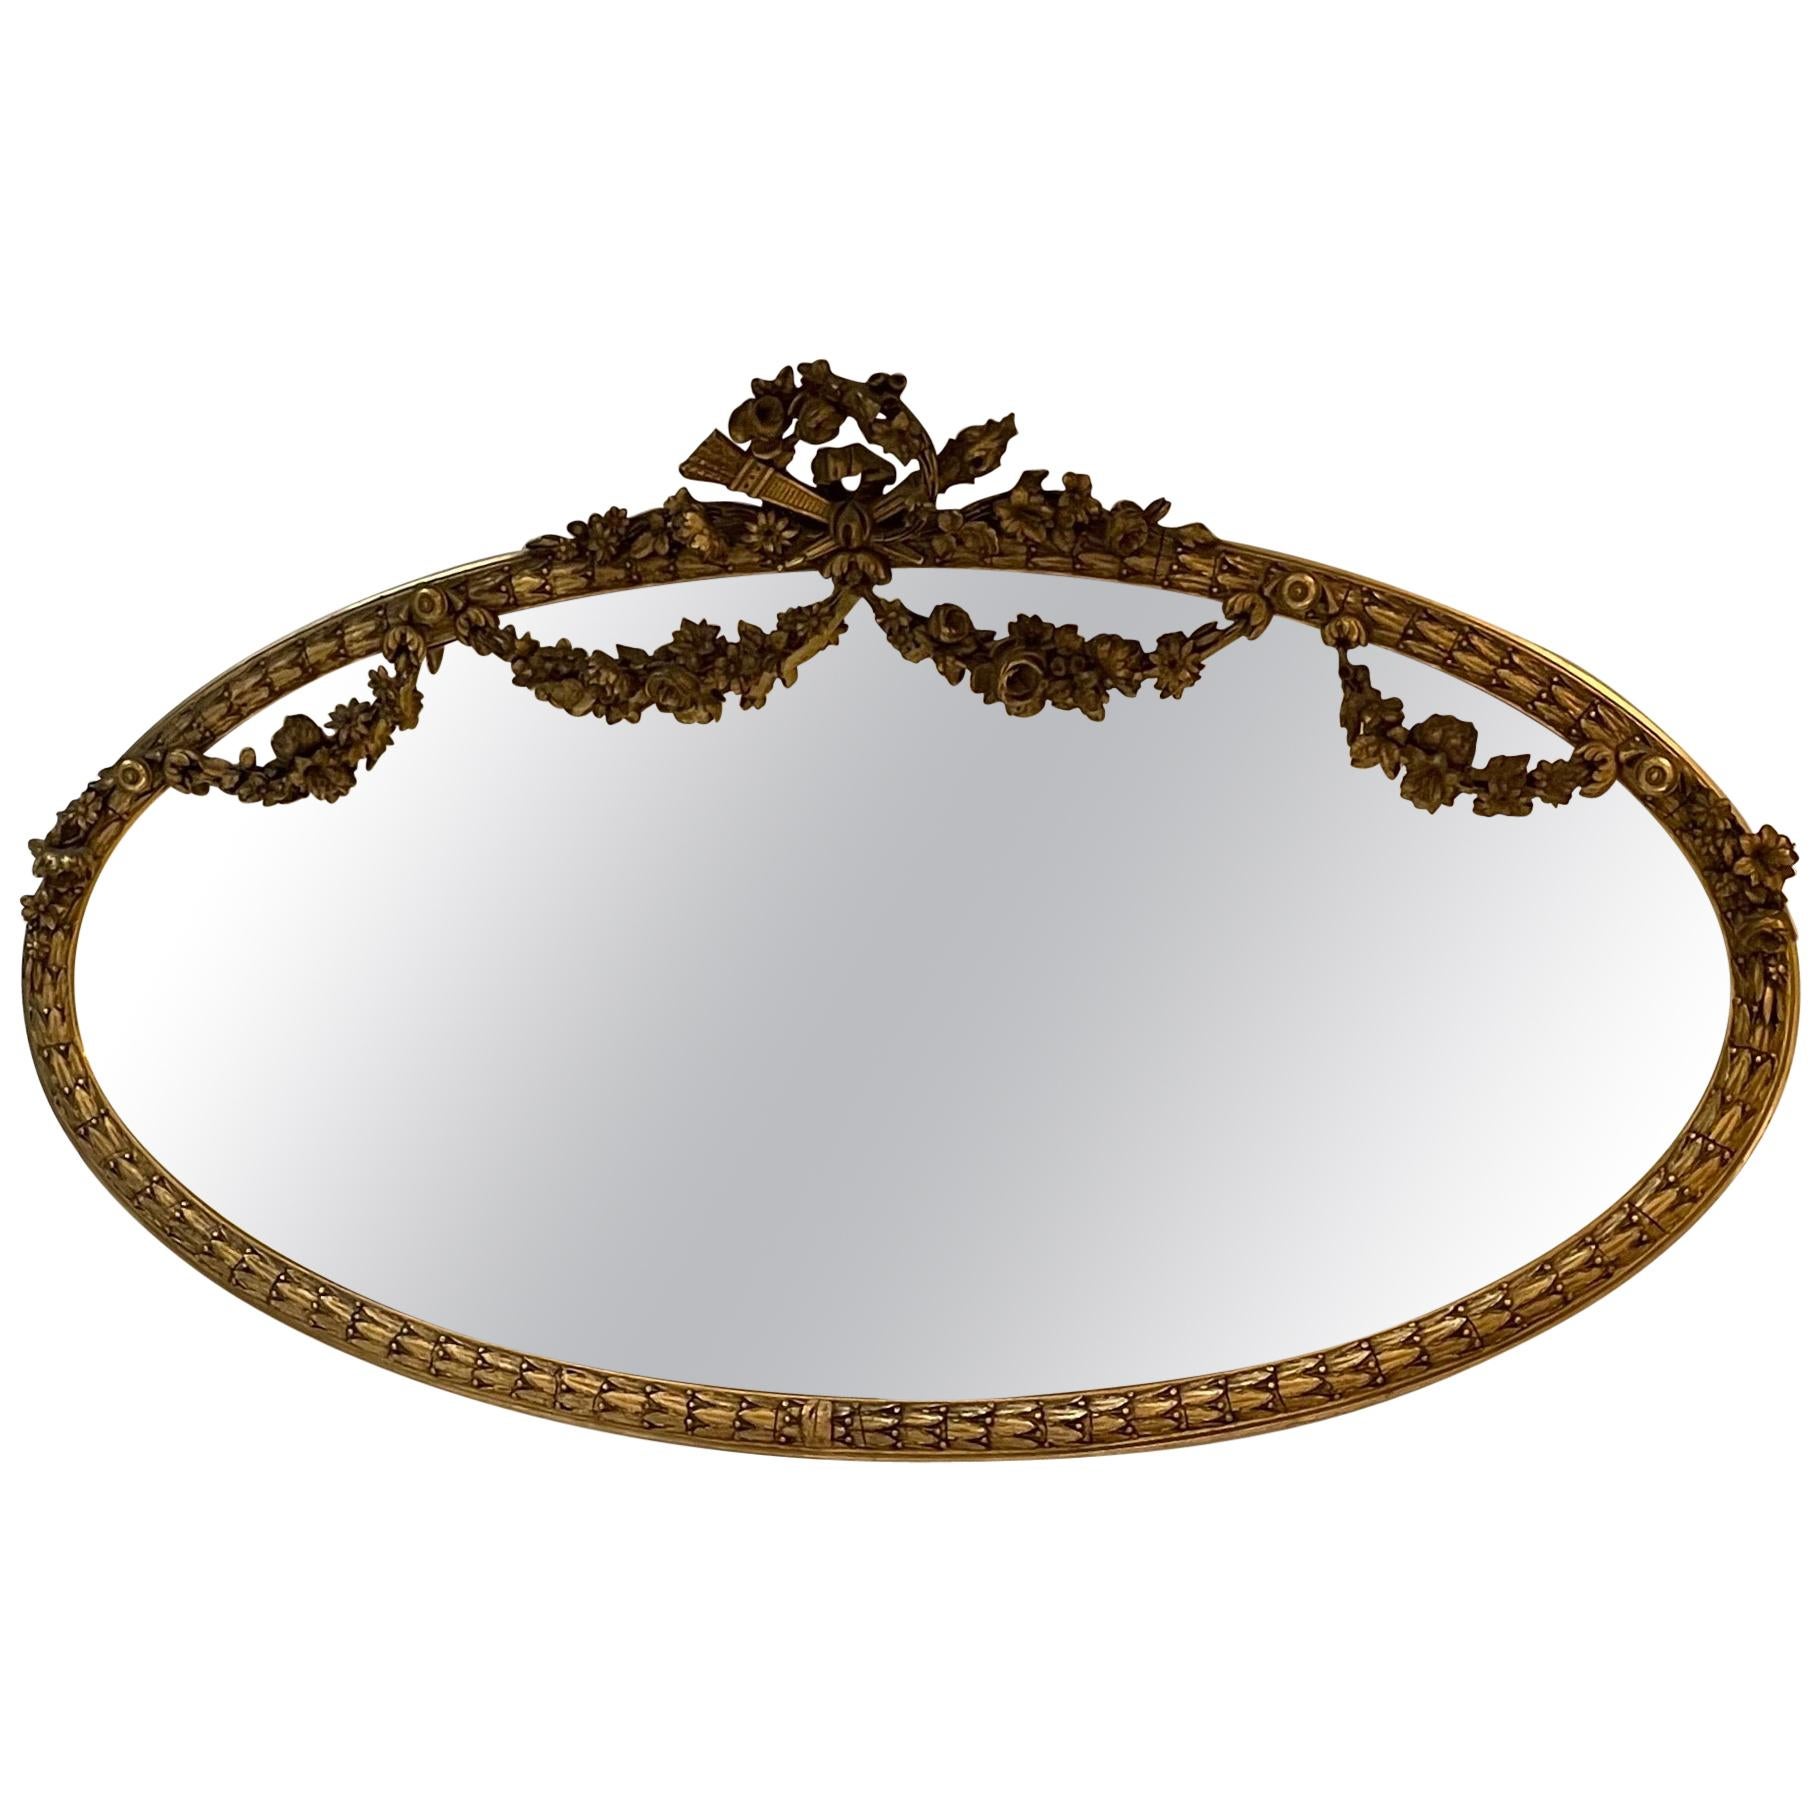 Wonderful French Louis XVI Horizontal Oval Giltwood Swag Over Mantle Mirror